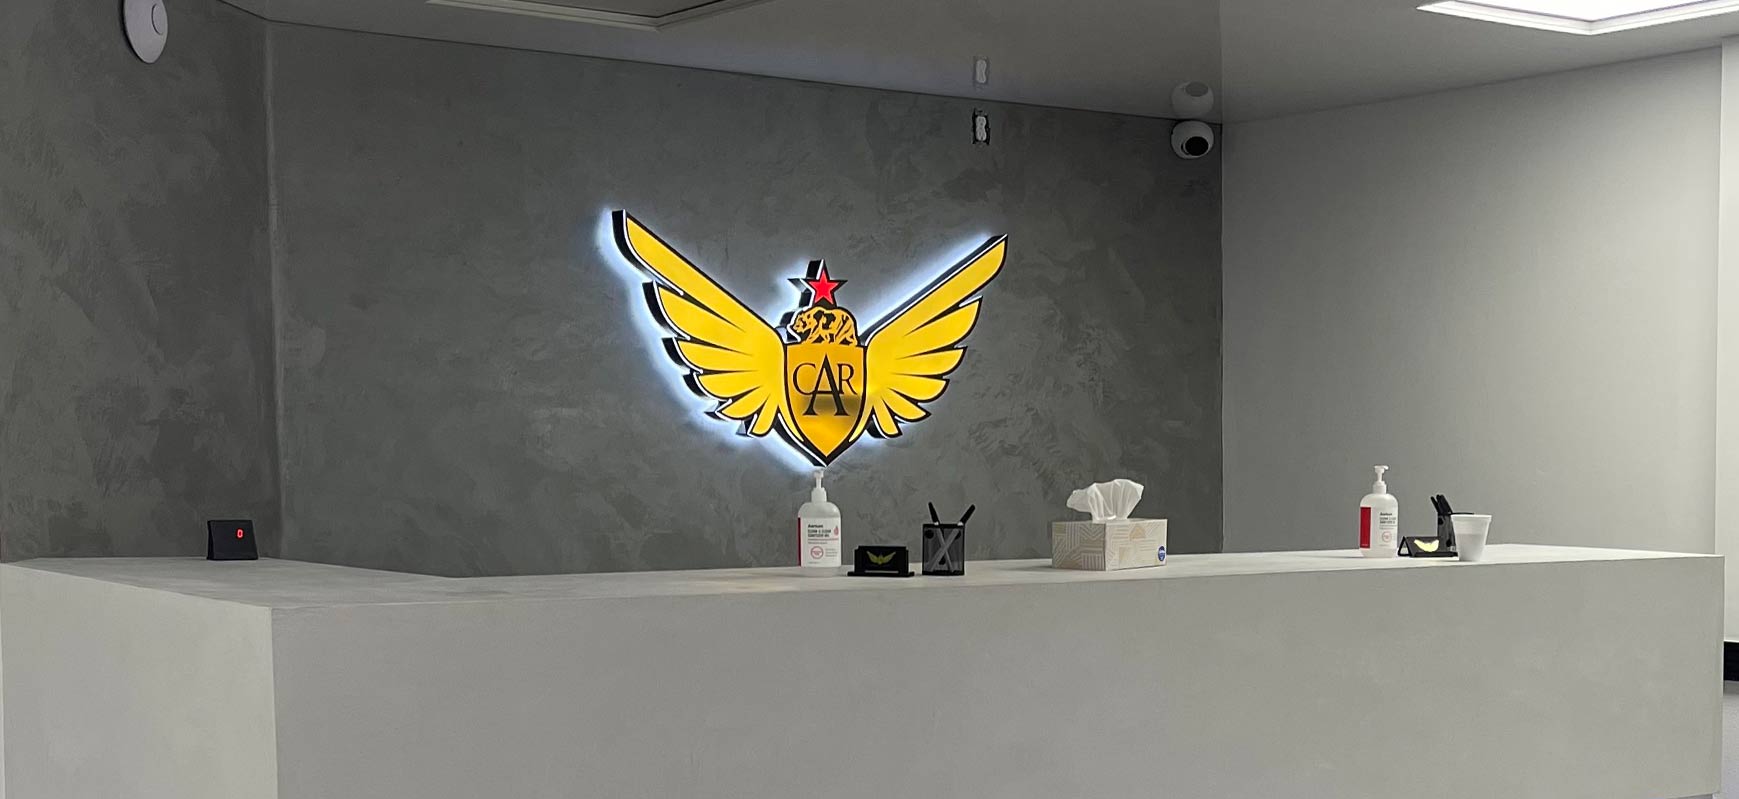 California Auto Rental painted murals applied on an interior wall for branding